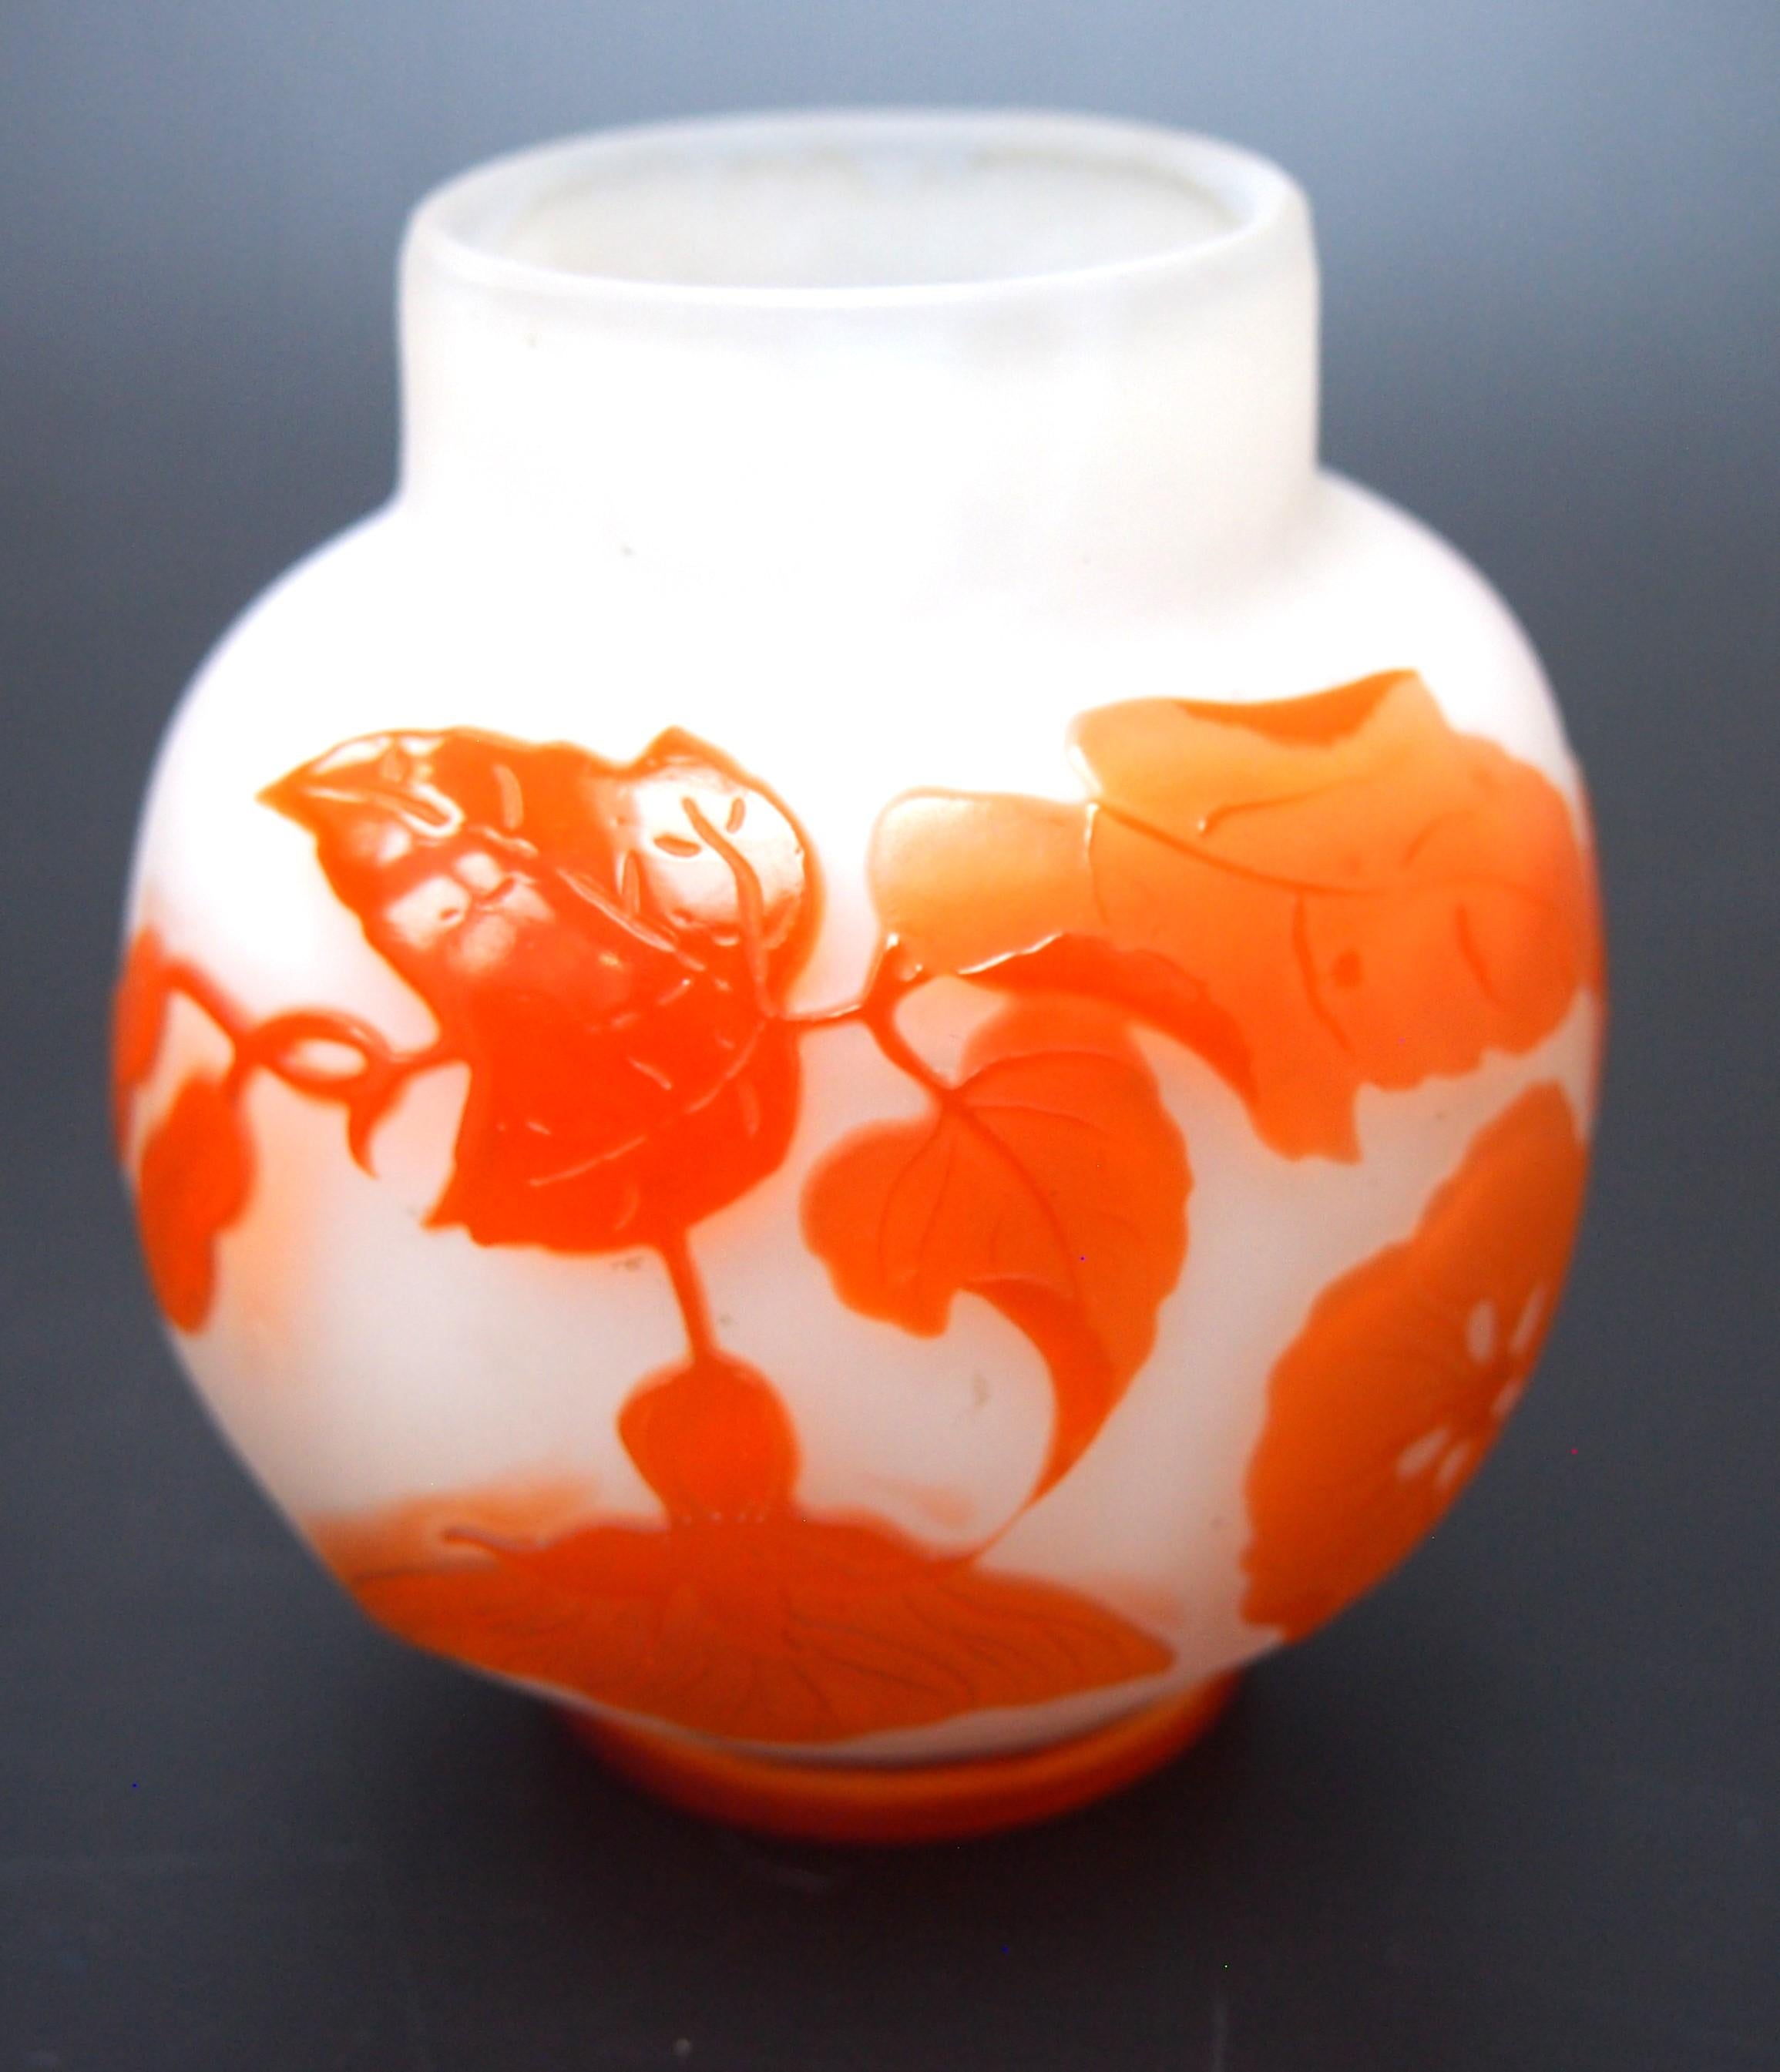 Striking Early French Art Nouveau Emile Galle Botanical Cameo Glass Vase -c1900 For Sale 3